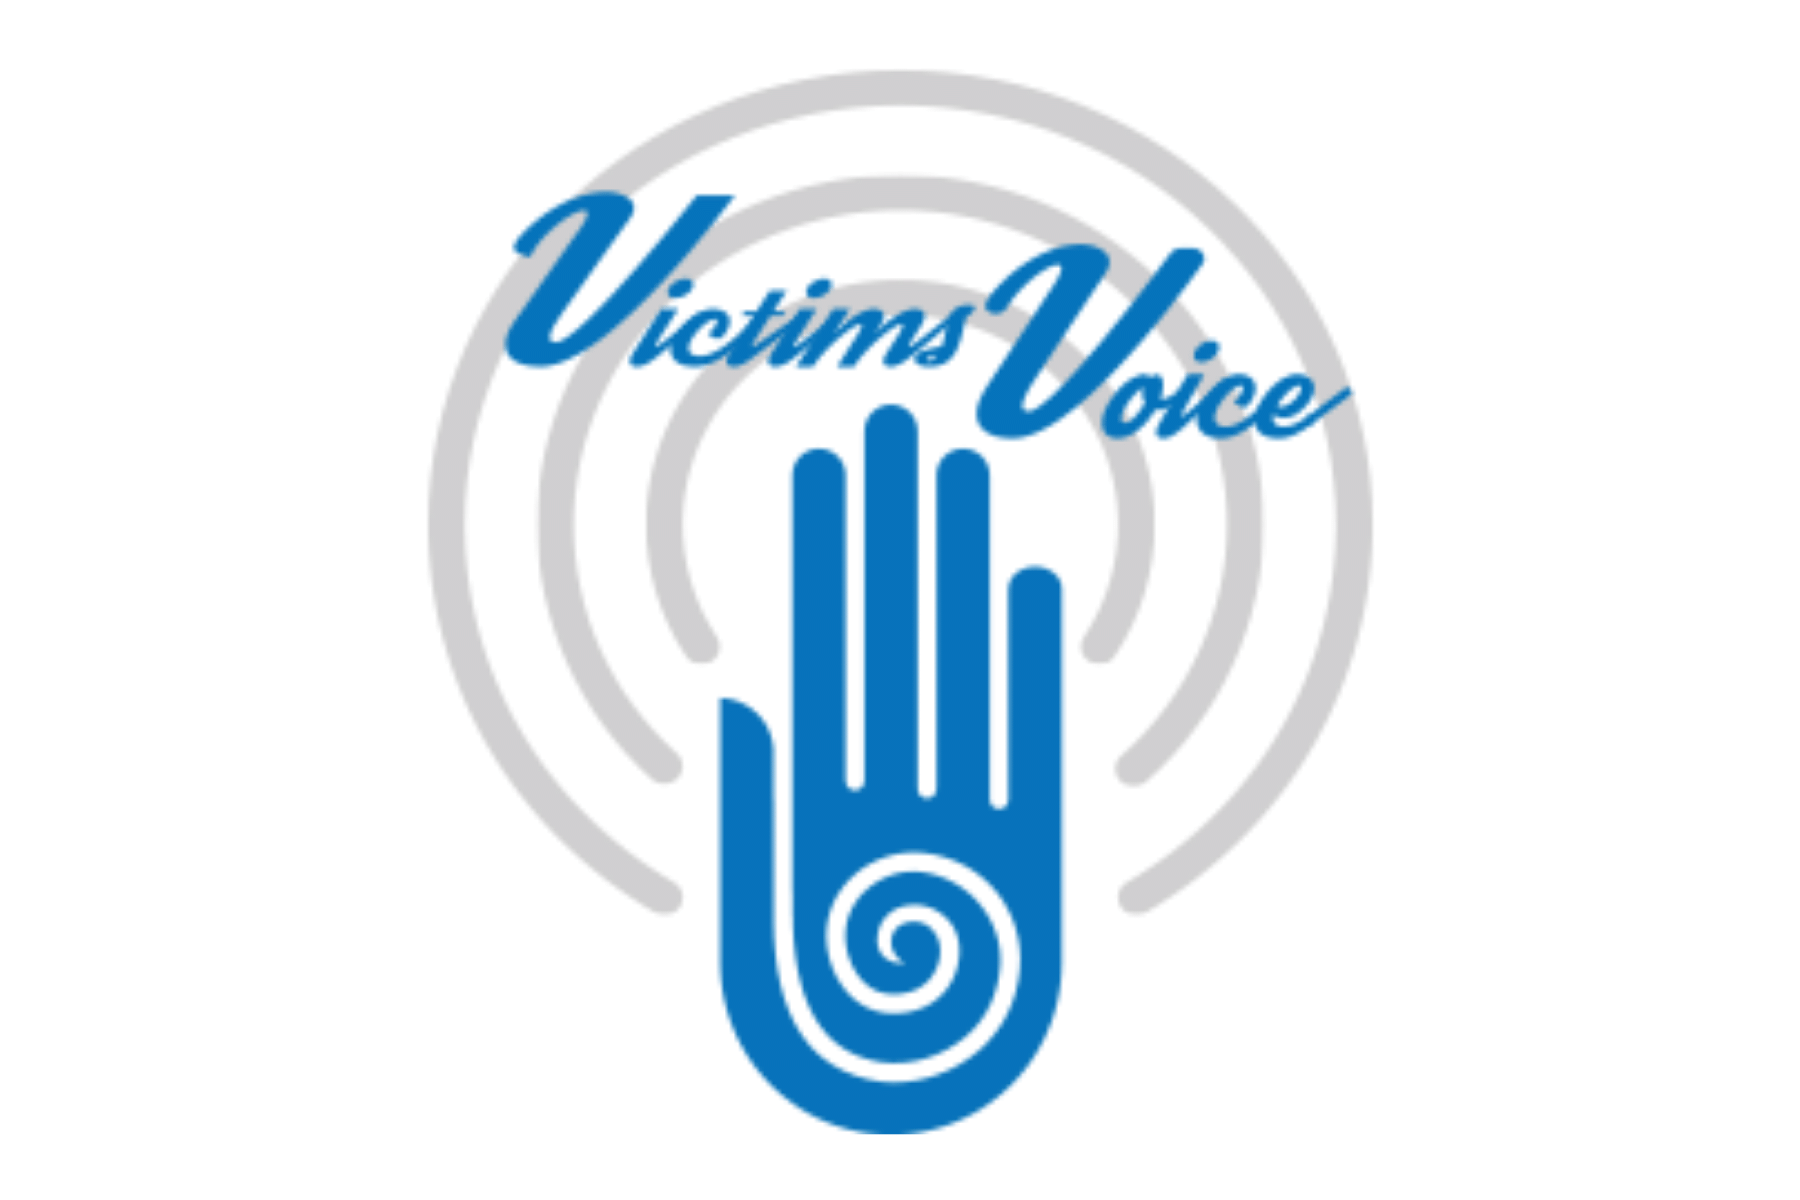 The words Victims Voice written above the outline of a hand that has a swirl in the palm.  